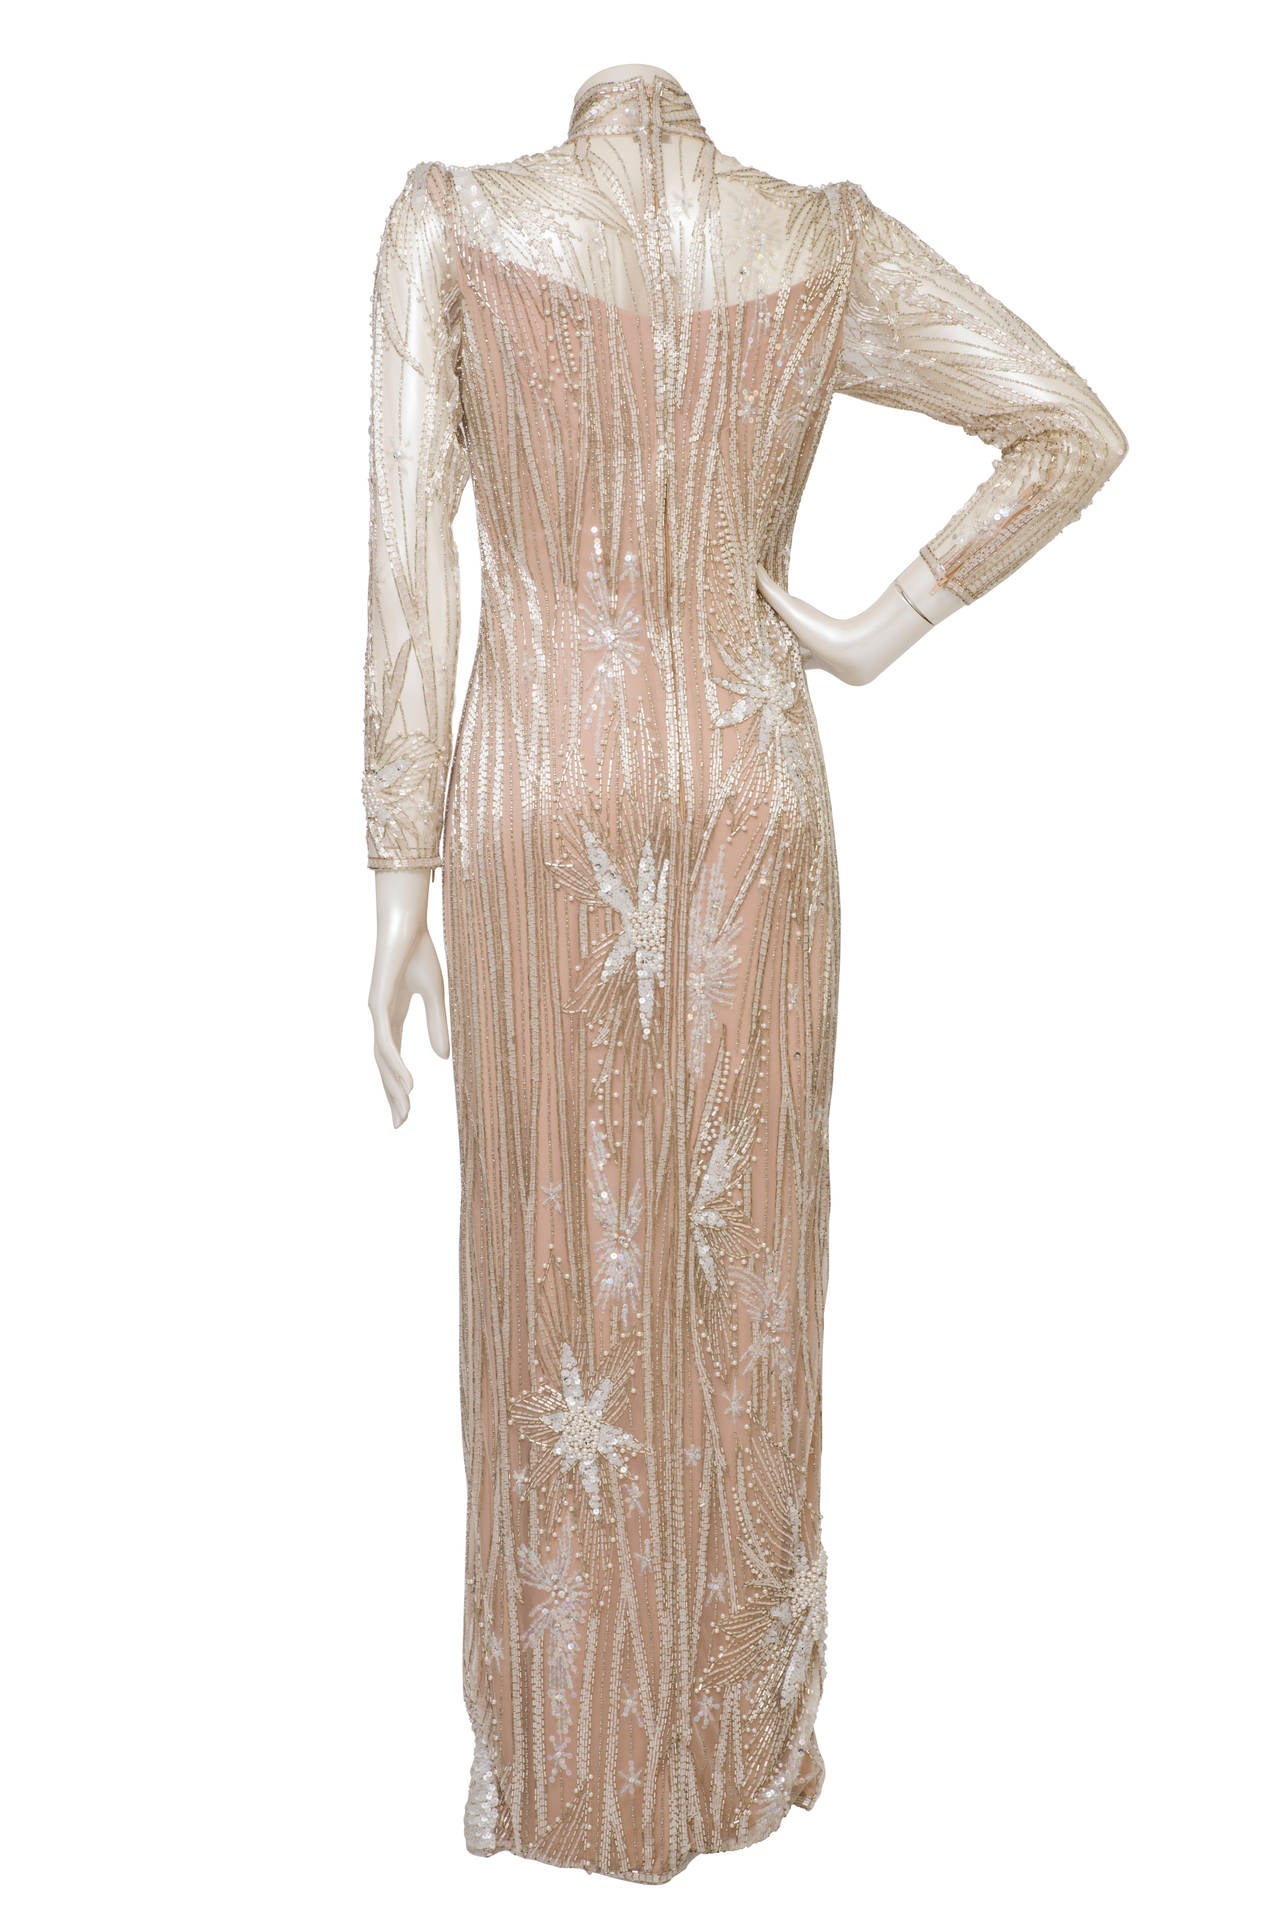 1980s Bob Mackie nude and silver beaded and pearl Gown / Dress
Unique Bob Mackie Gown totally made of nude and silver beaded. This kind of very early net Mackie dresses were, and still are, priced really high as they  really are work of art. 
Size